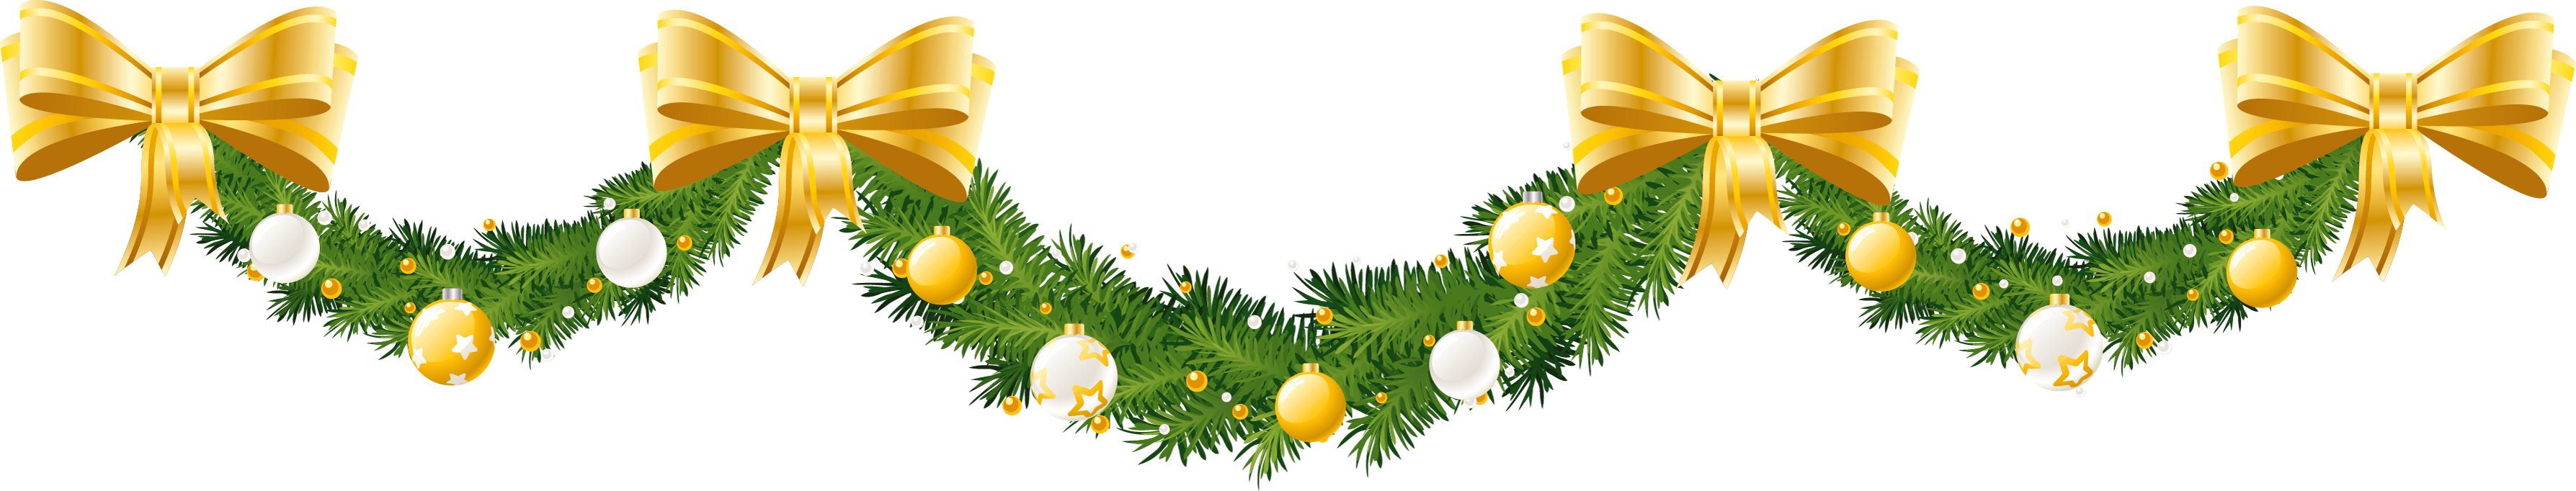 Download PNG image - Christmas Wreath PNG Photos 